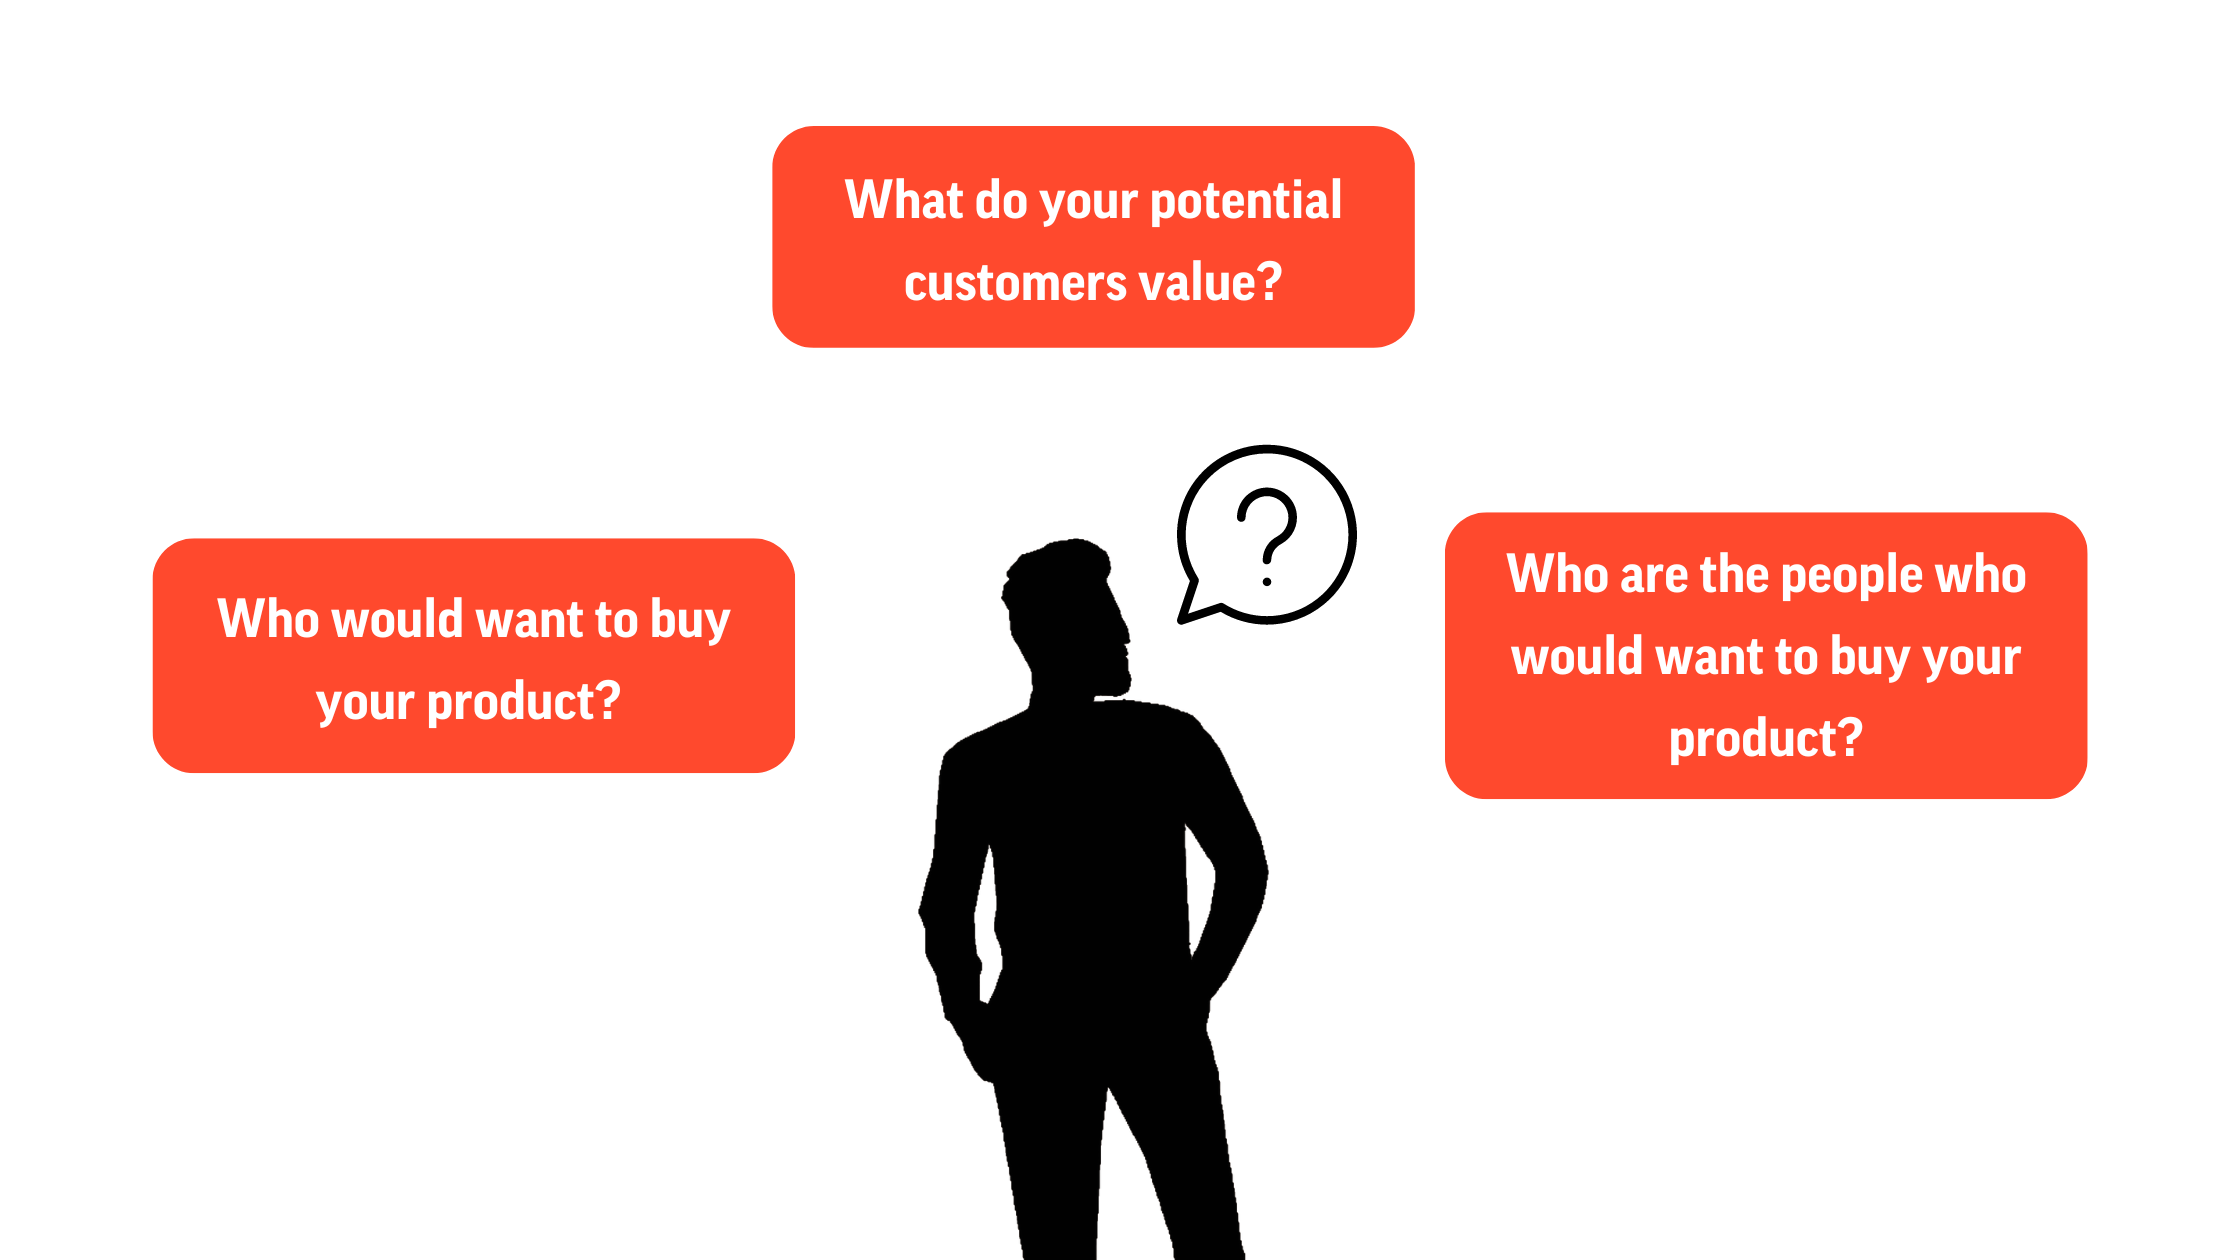 Questions to generate well-informed personas